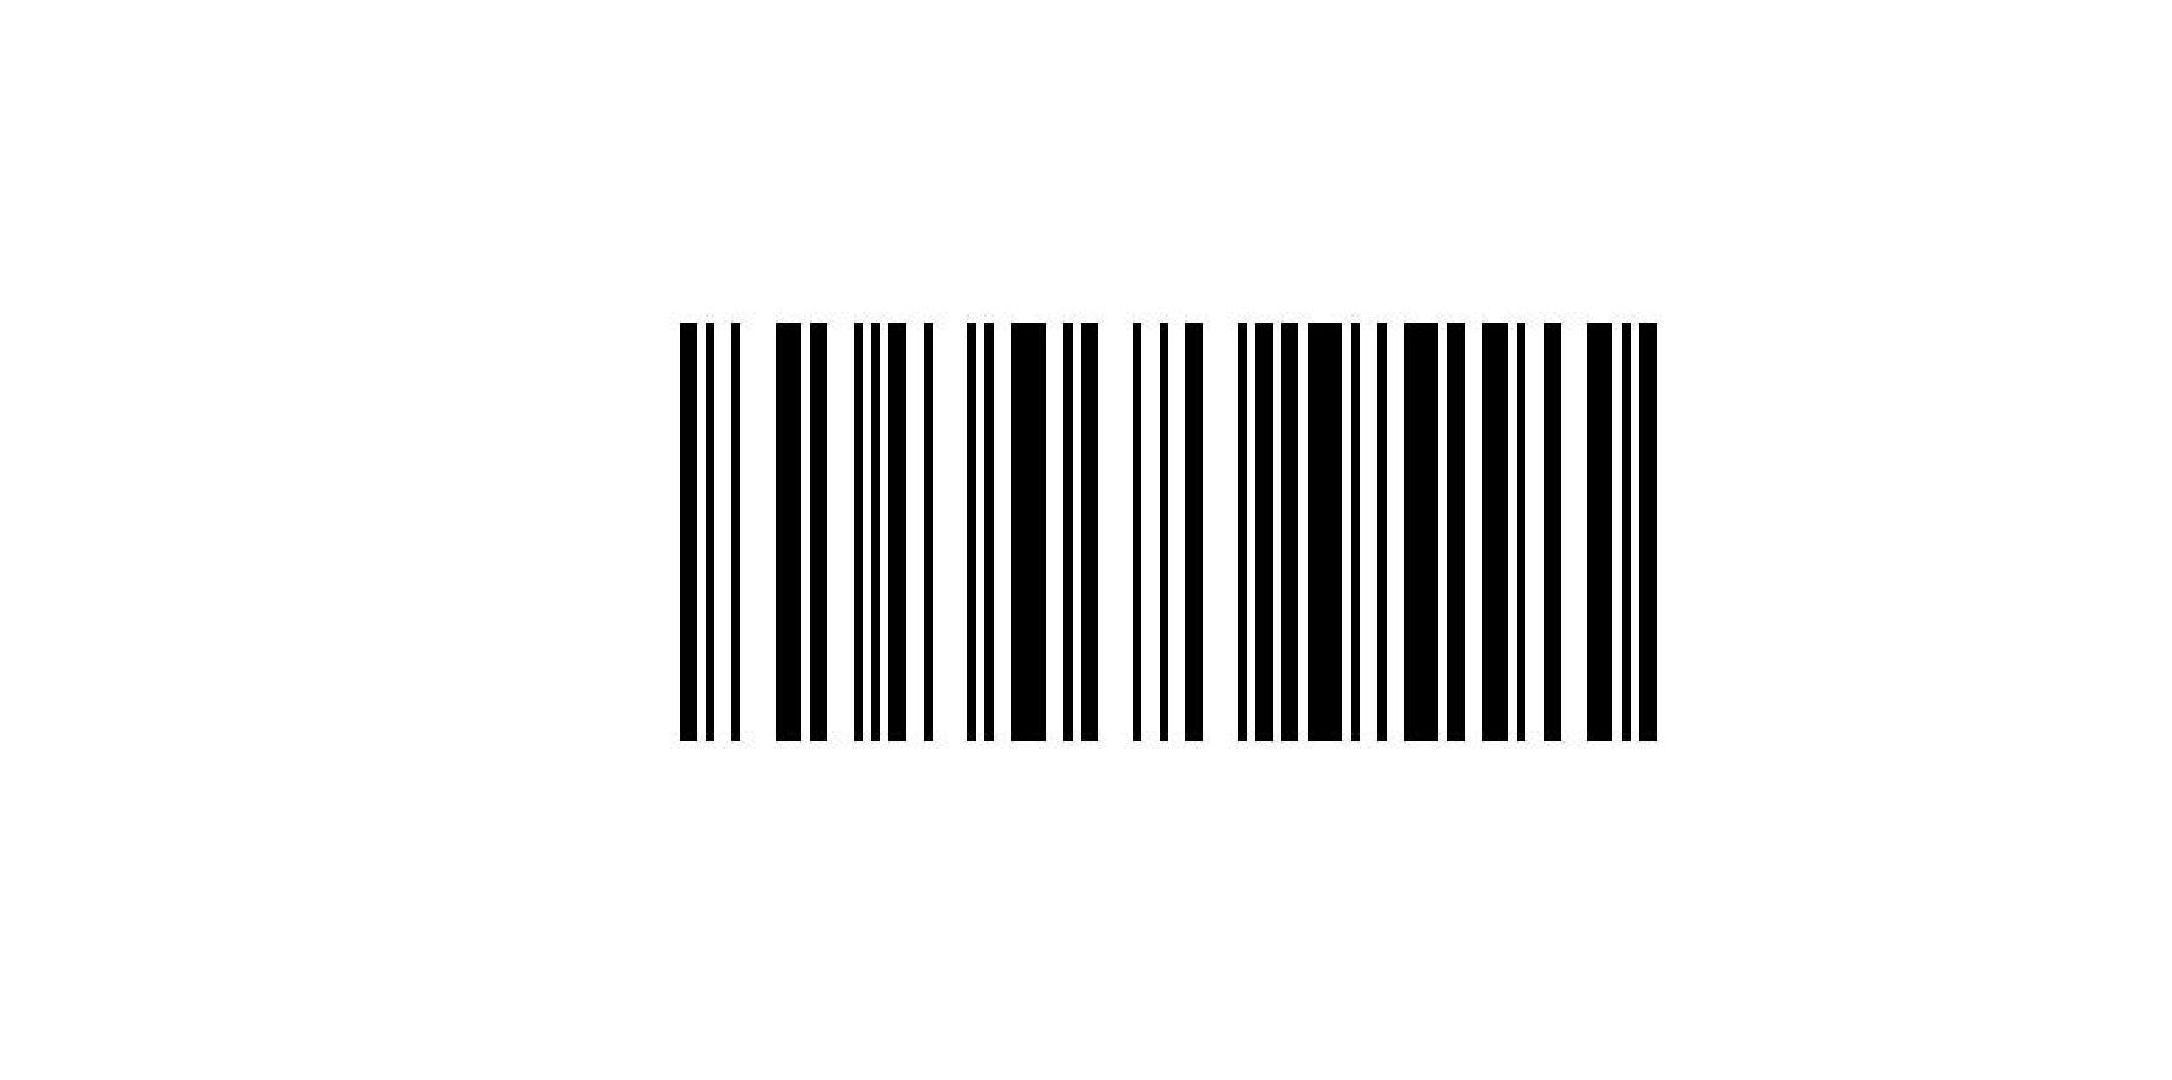 Barcode phone, desktop wallpaper, picture, photo, bckground image